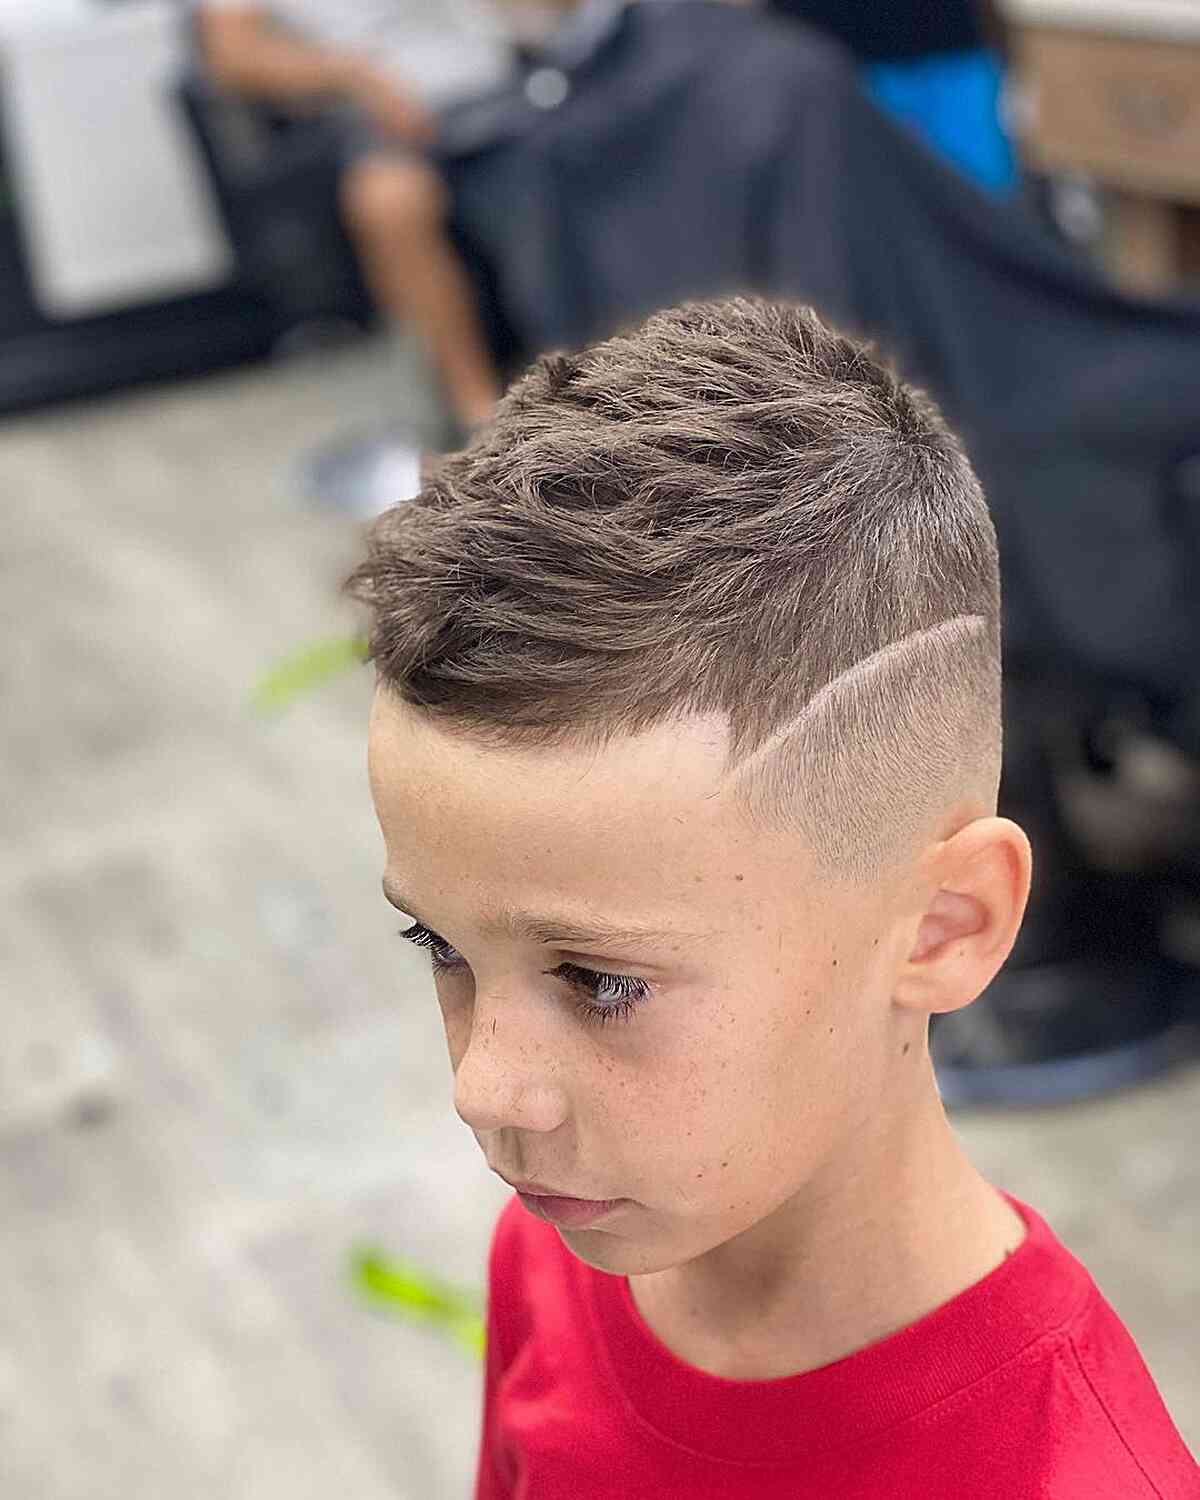 BACK TO SCHOOL HAIRSTYLES FOR YOUNG BOYS